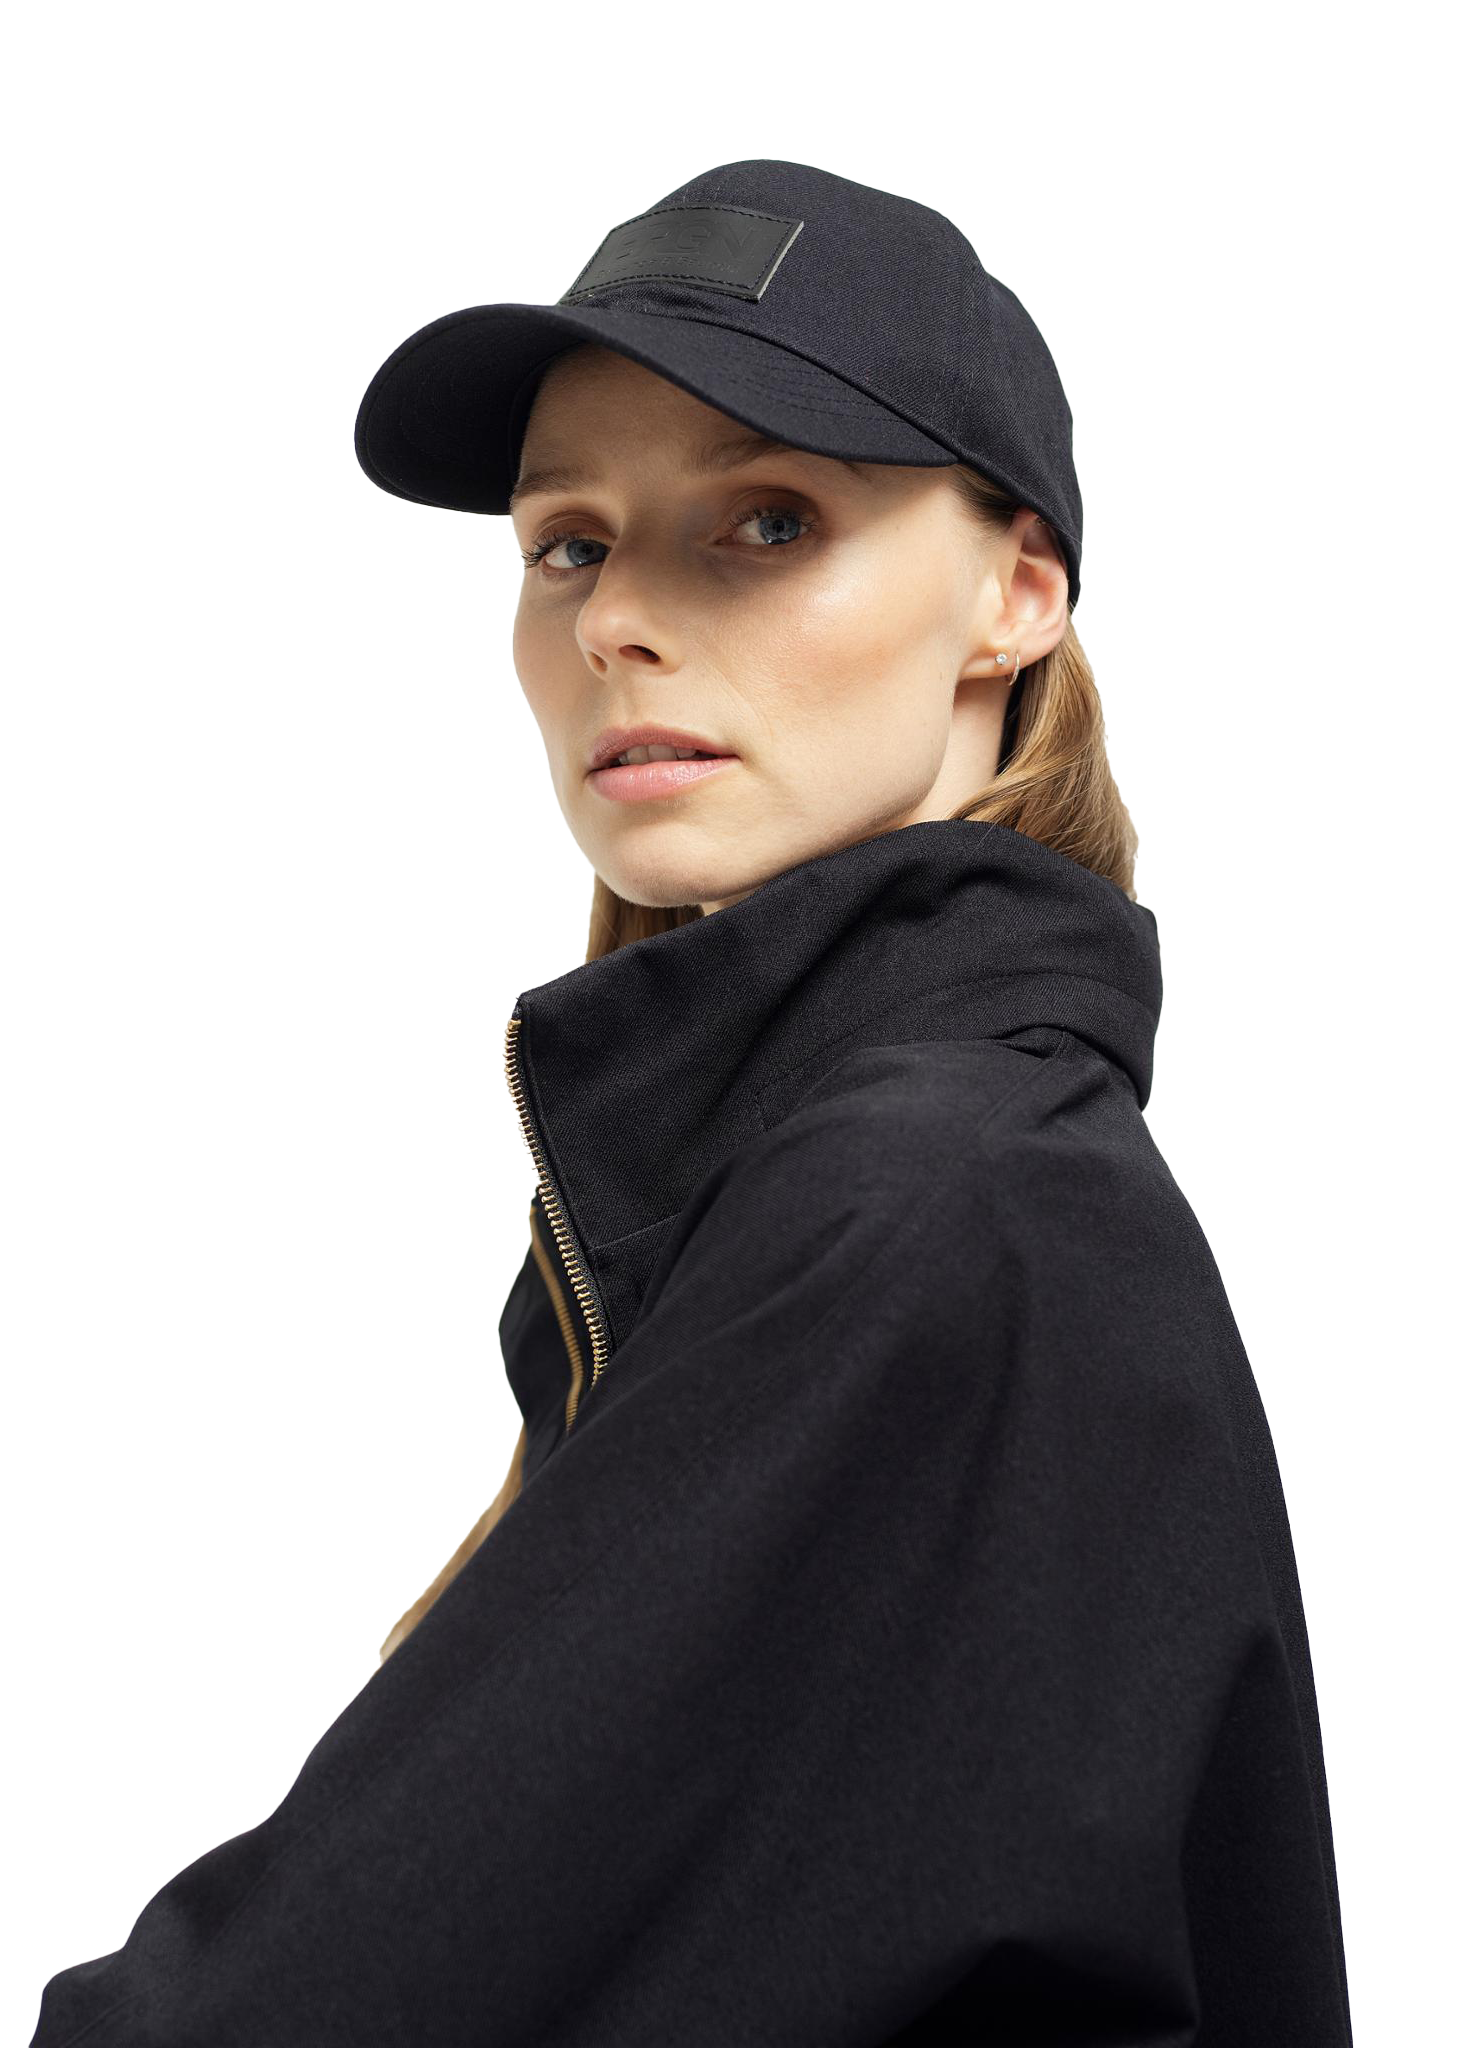 BRGN by Lunde & Gaundal Solregn caps Accessories 095 New Black